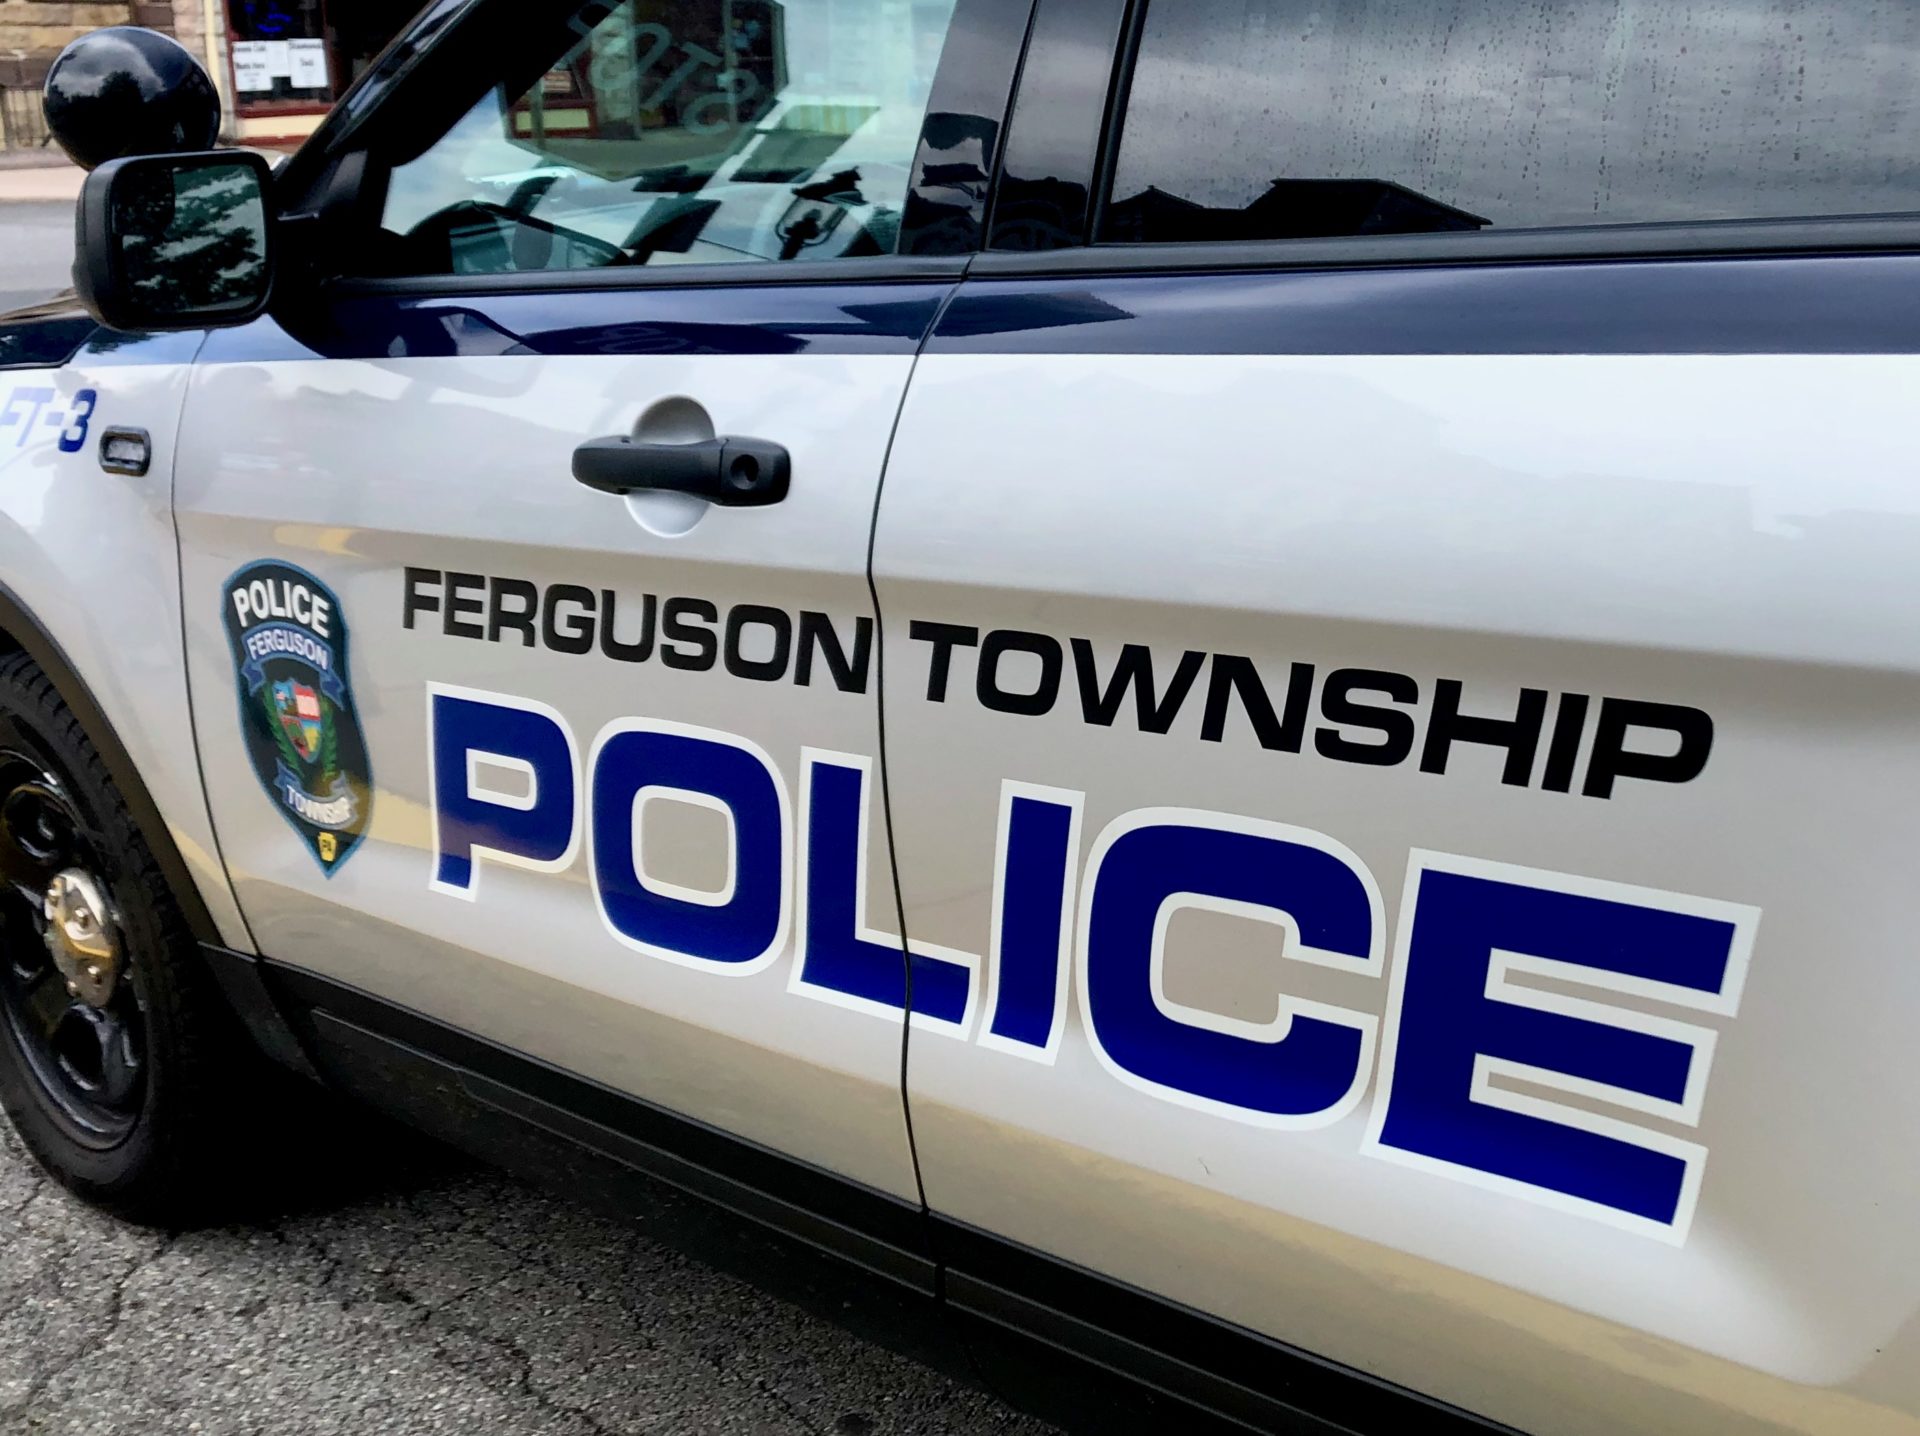 "Ferguson Township Police" on the side doors of a gray police SUV.